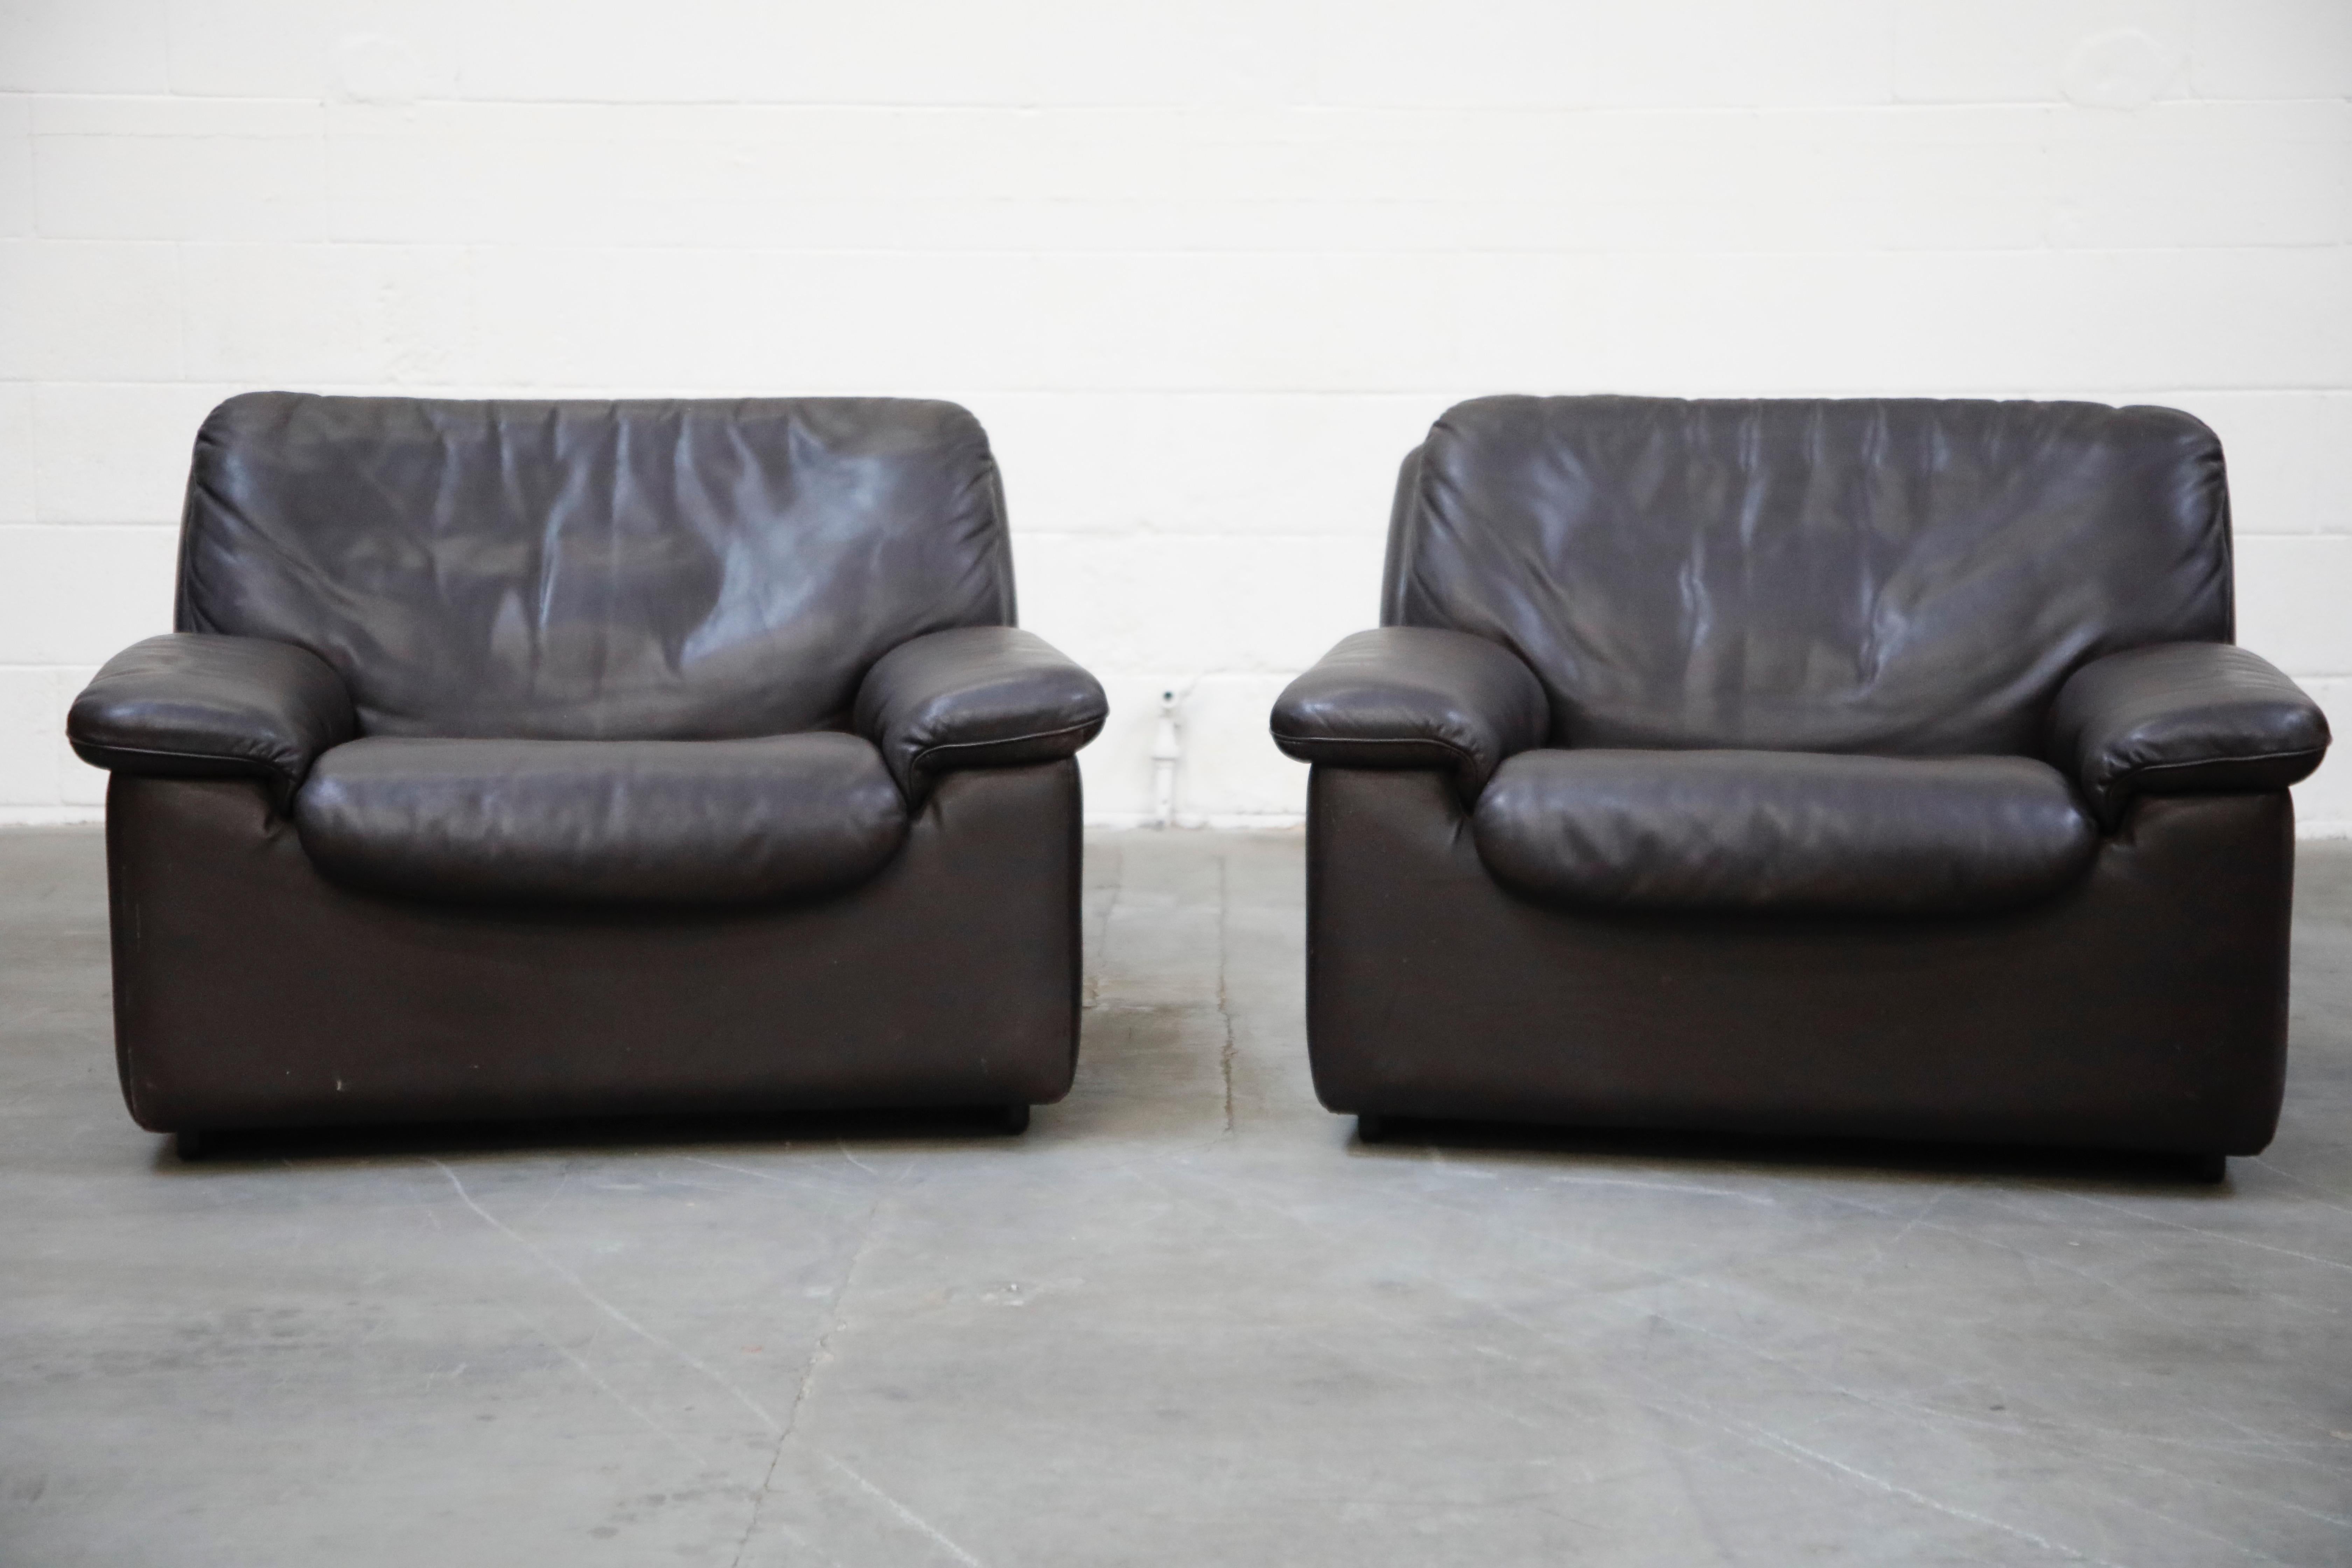 A pair of incredibly laid-back and comfortable De Sede leather club chairs in an attractive high quality deep colored leather, designed and produced in the 1960s in Switzerland. The design features clever lines and shapes, making this work well in a